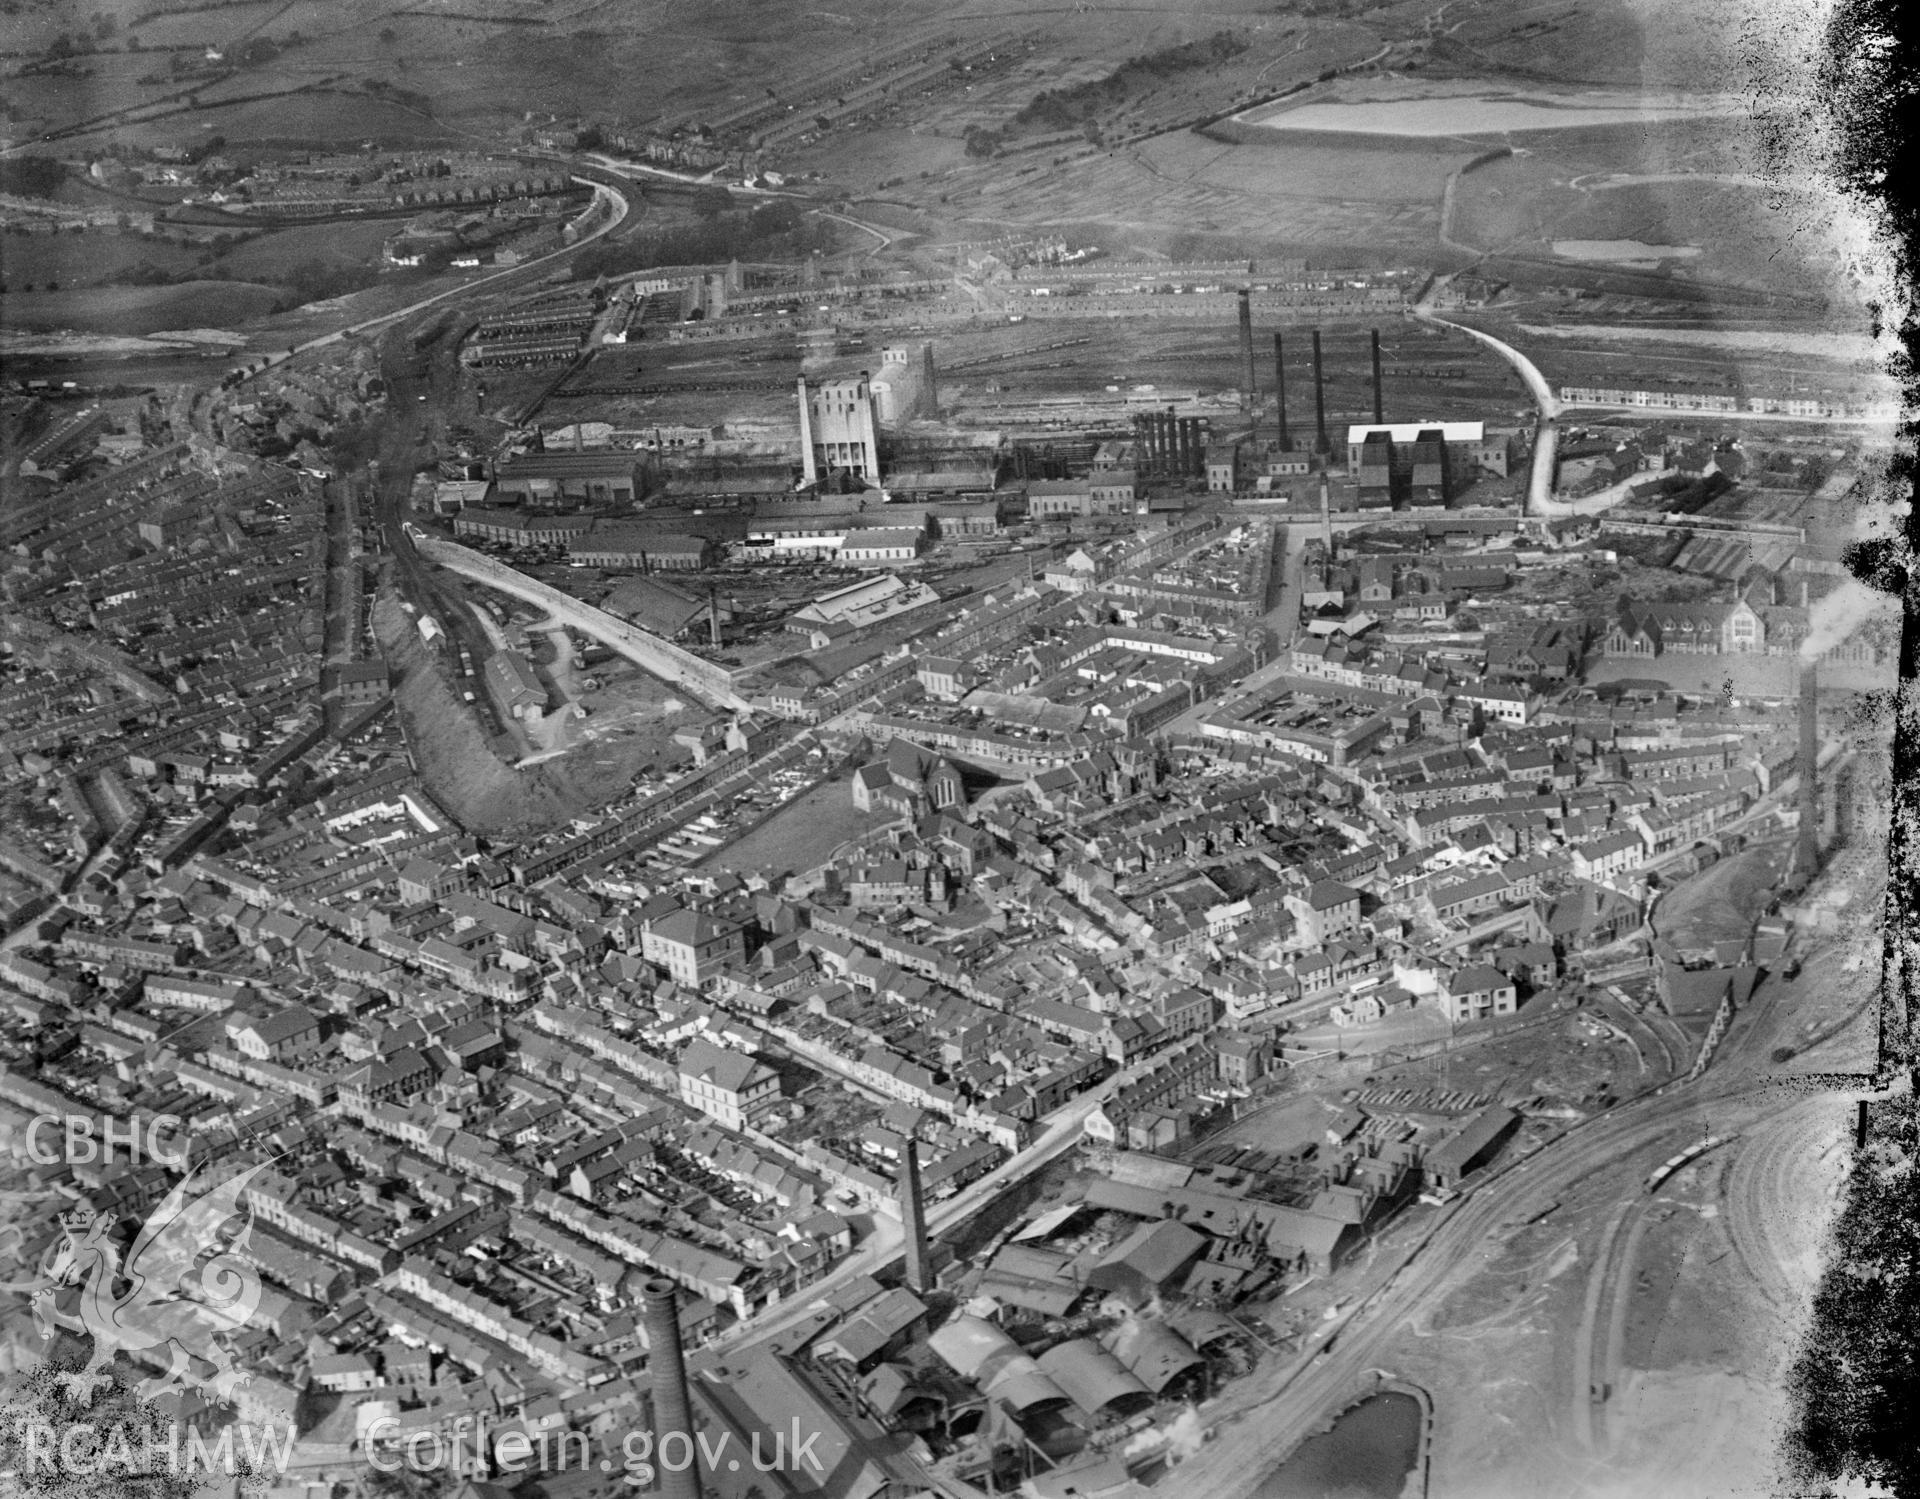 View of Merthyr Tydfil and Dowlais, oblique aerial view. 5?x4? black and white glass plate negative.